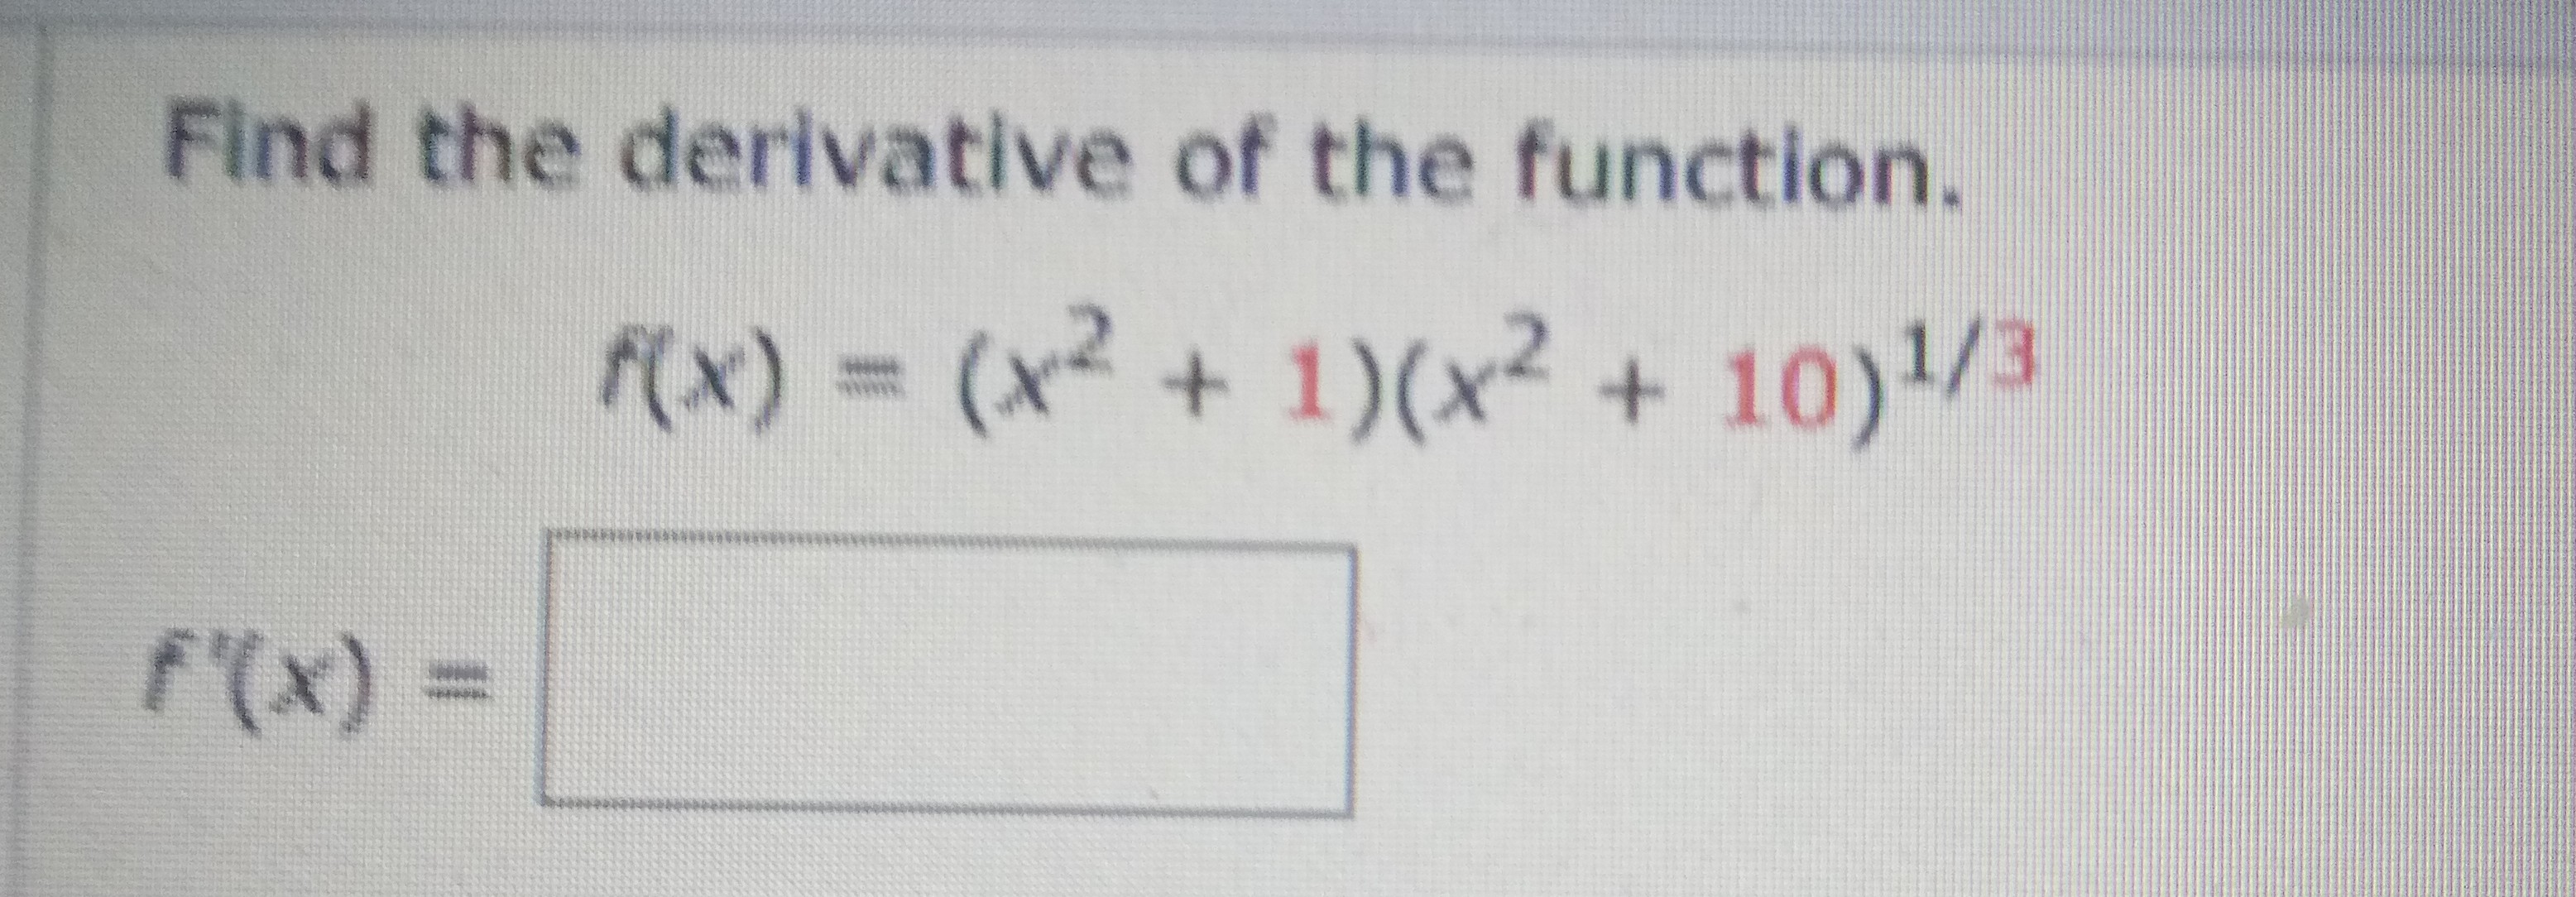 Find the derivative of the function.
f(x)% 3D(x²+1)(x² + 10)/3
f'(x)%3D
